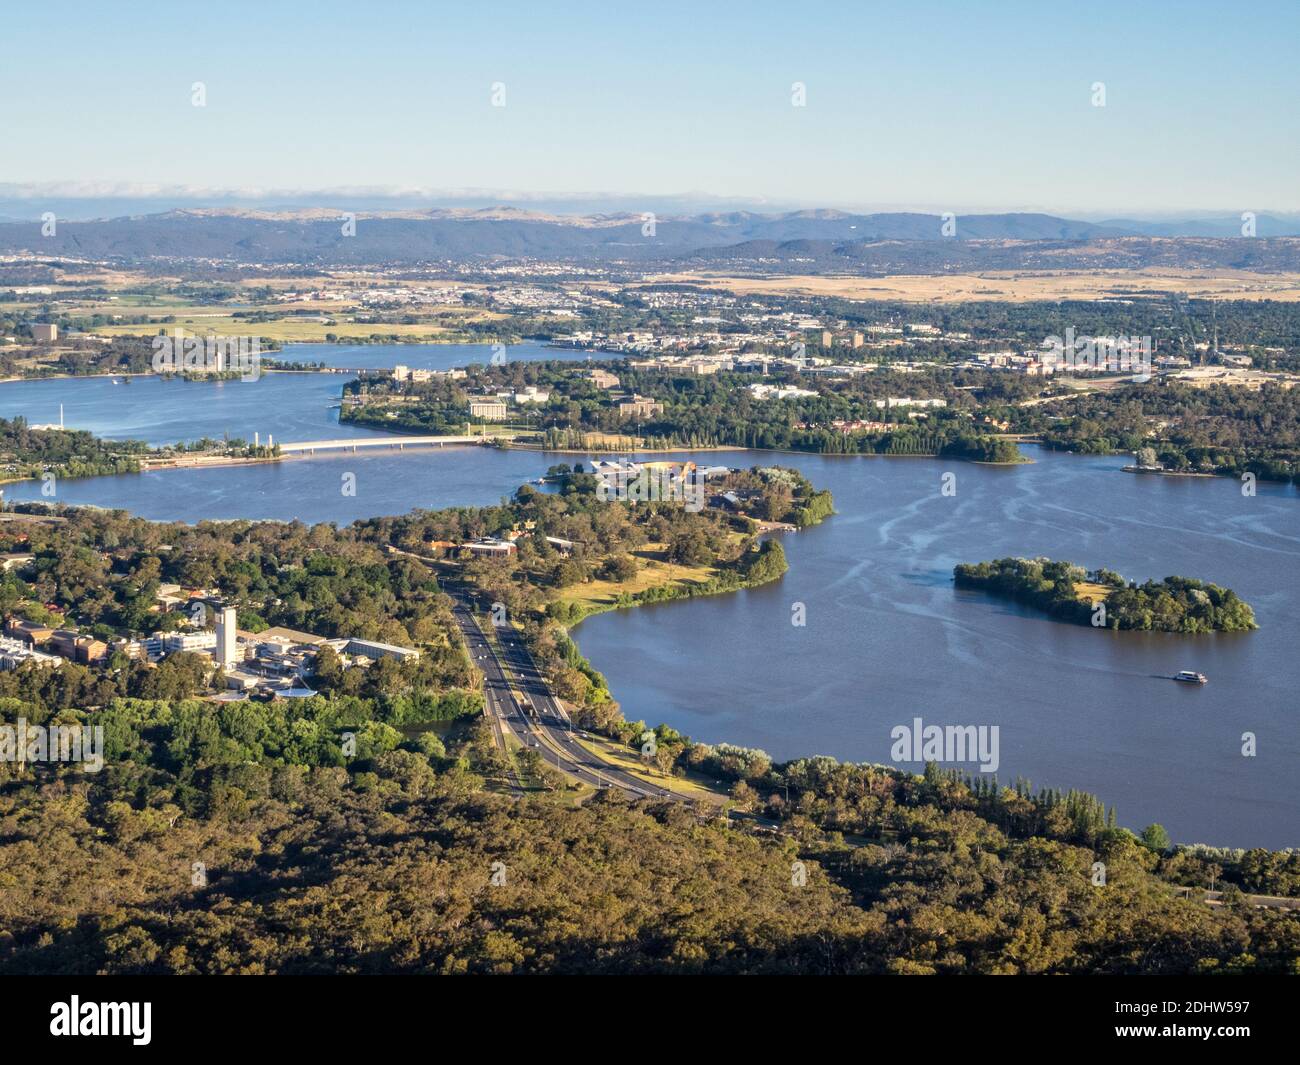 Lake Burley Griffin photographed from the Telstra Tower - Canberra, Australian Capital Territory, Australia Stock Photo